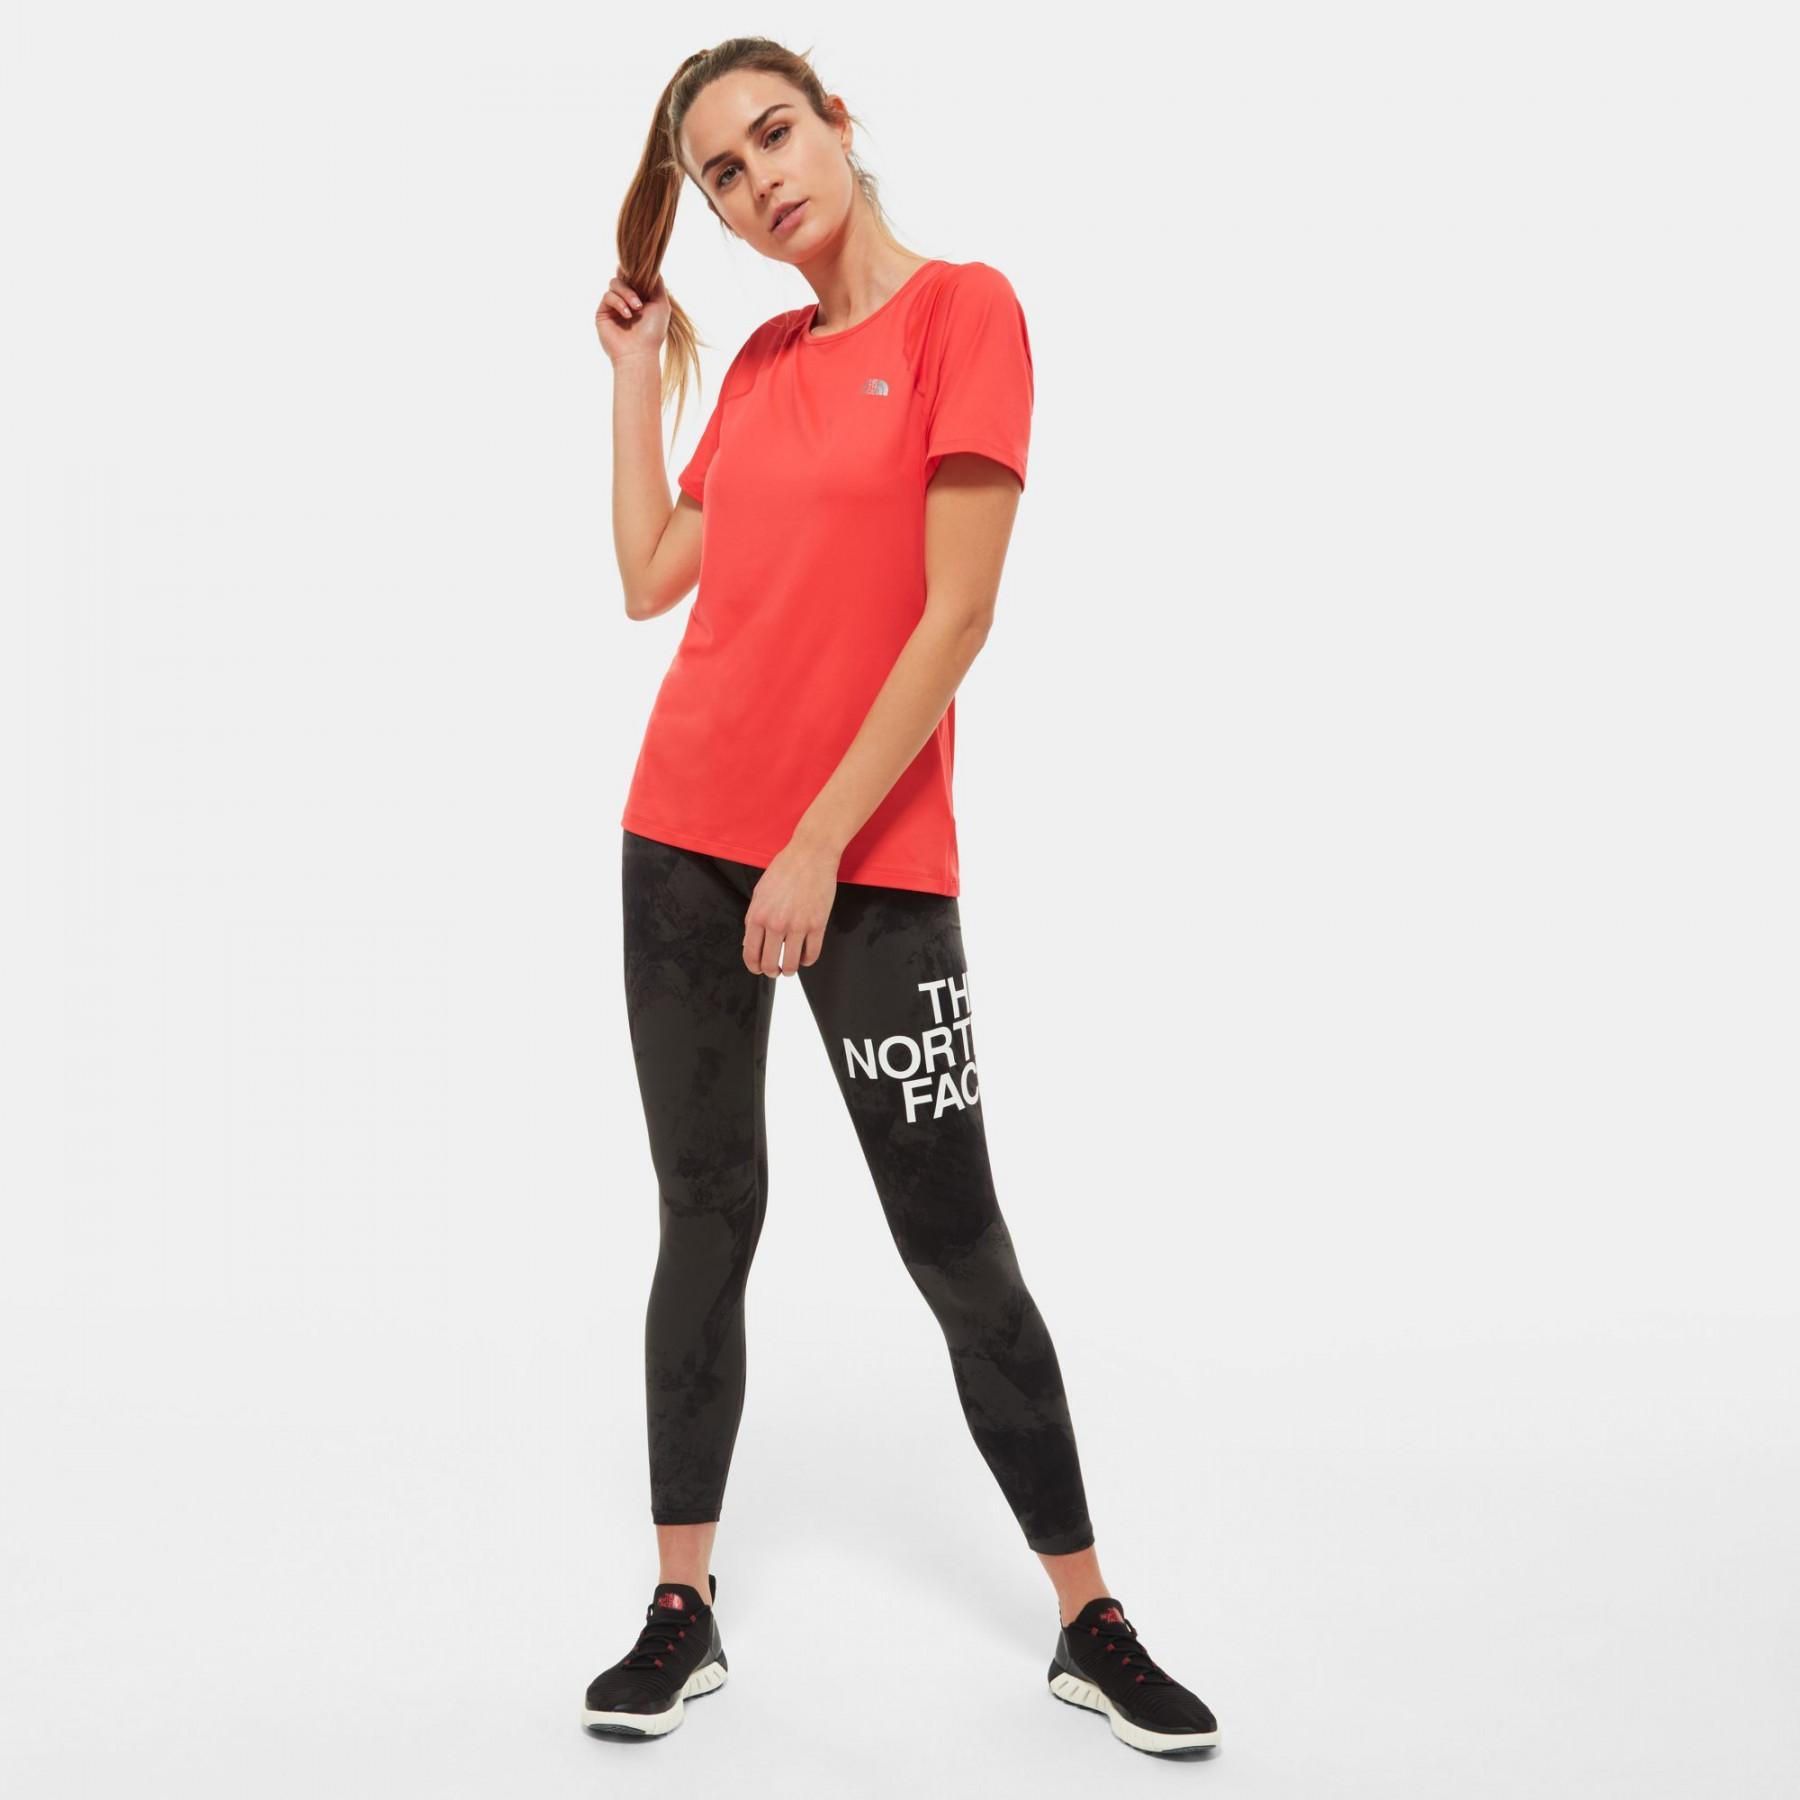 T-shirt femme The North Face Ambition